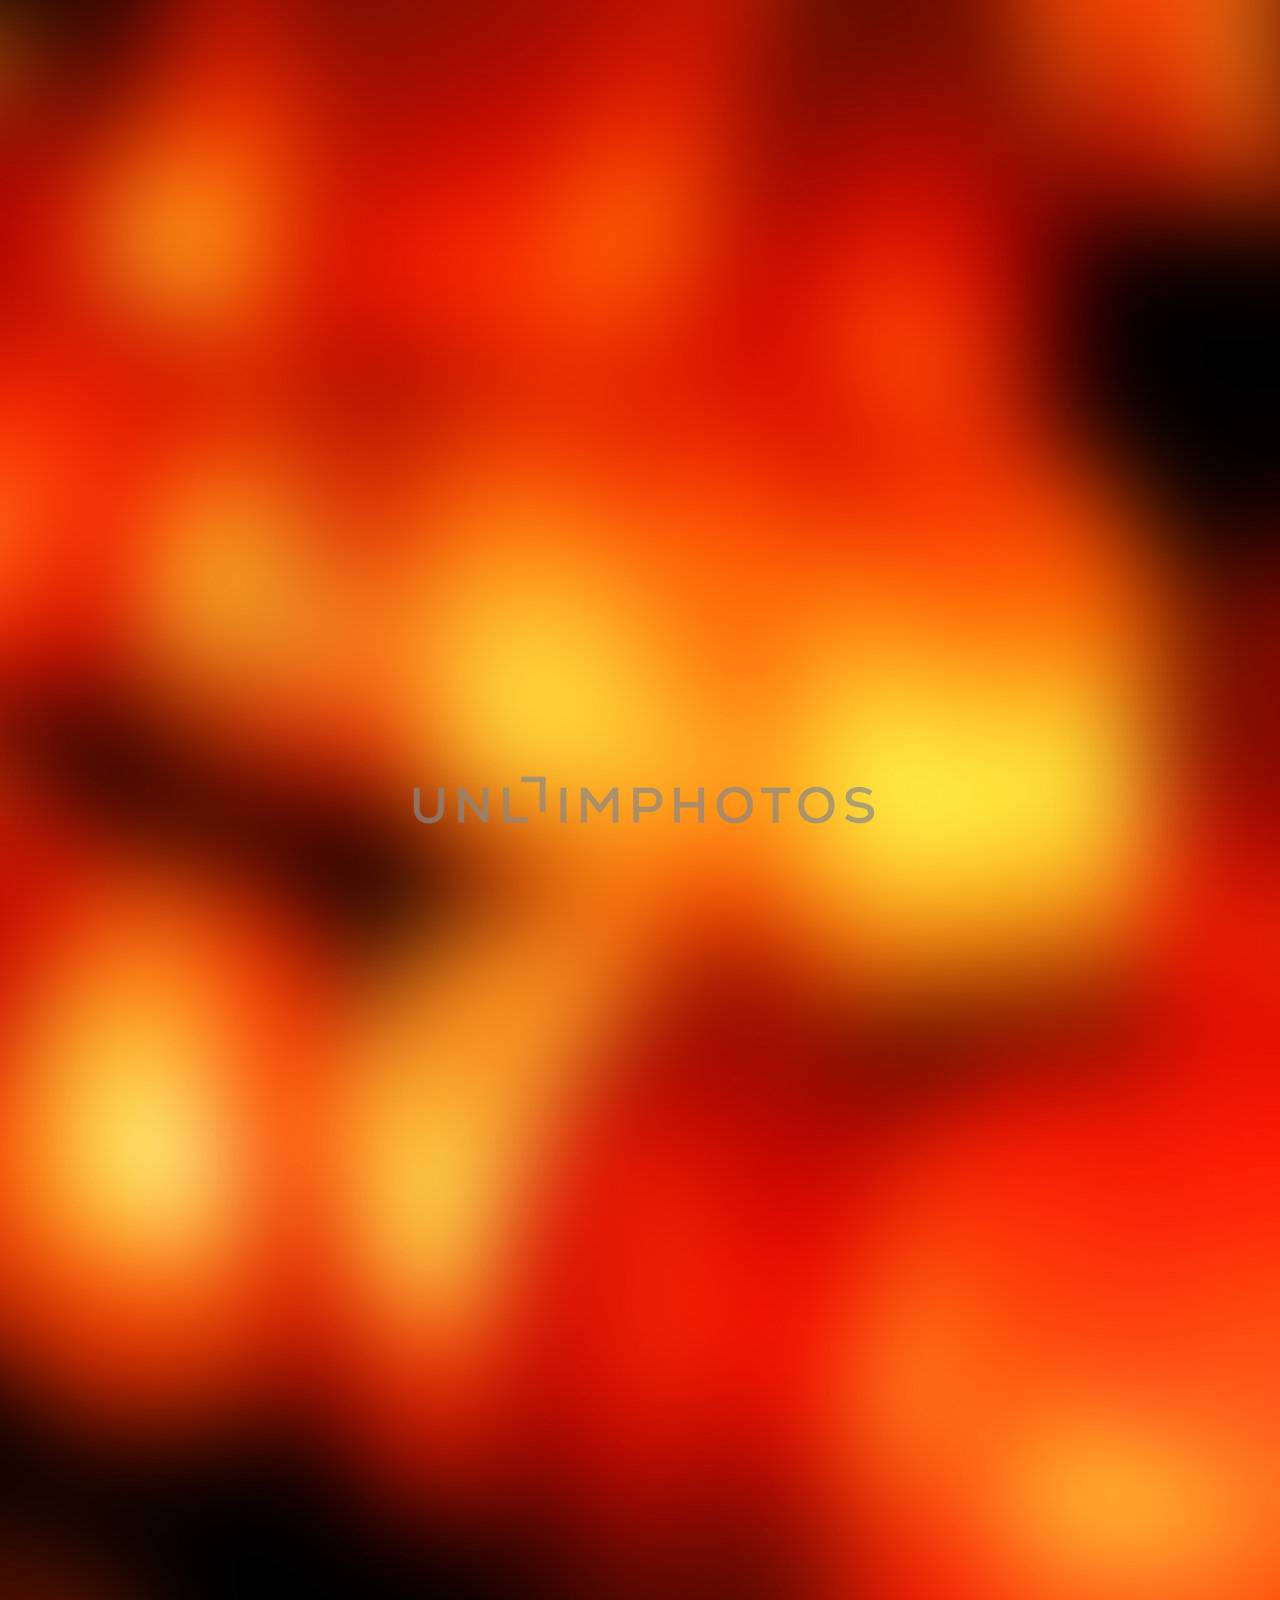 A soft focus warm fiery background image